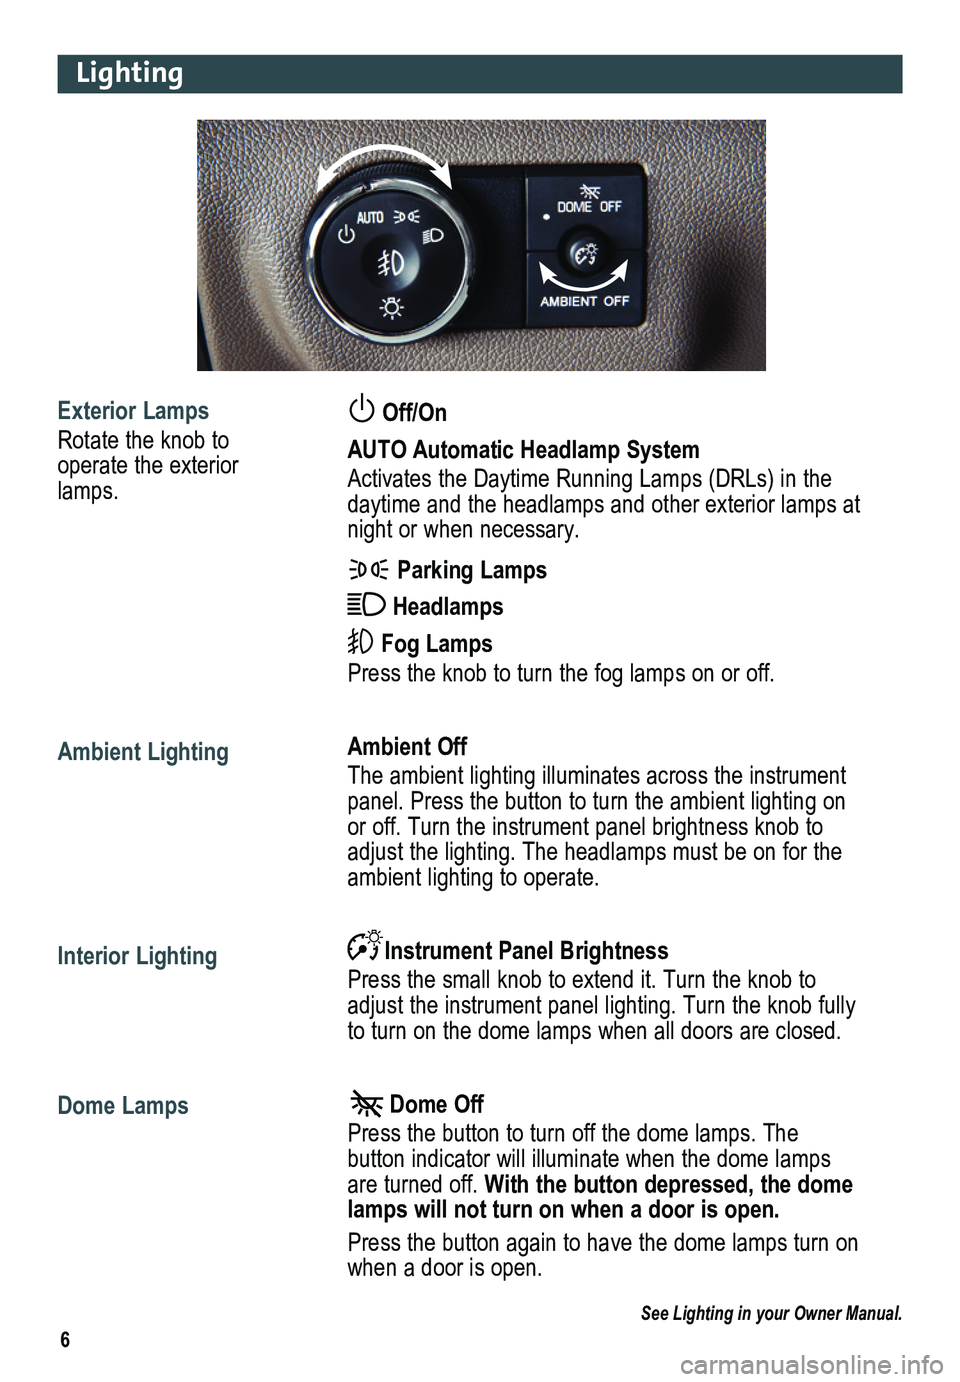 GMC ACADIA 2013  Get To Know Guide 6
Lighting
Exterior Lamps
Rotate the knob to operate the exterior lamps.
 
Ambient Lighting
 
Interior Lighting
Dome Lamps
 
 Off/On 
AUTO Automatic Headlamp System
Activates the Daytime Running Lamps